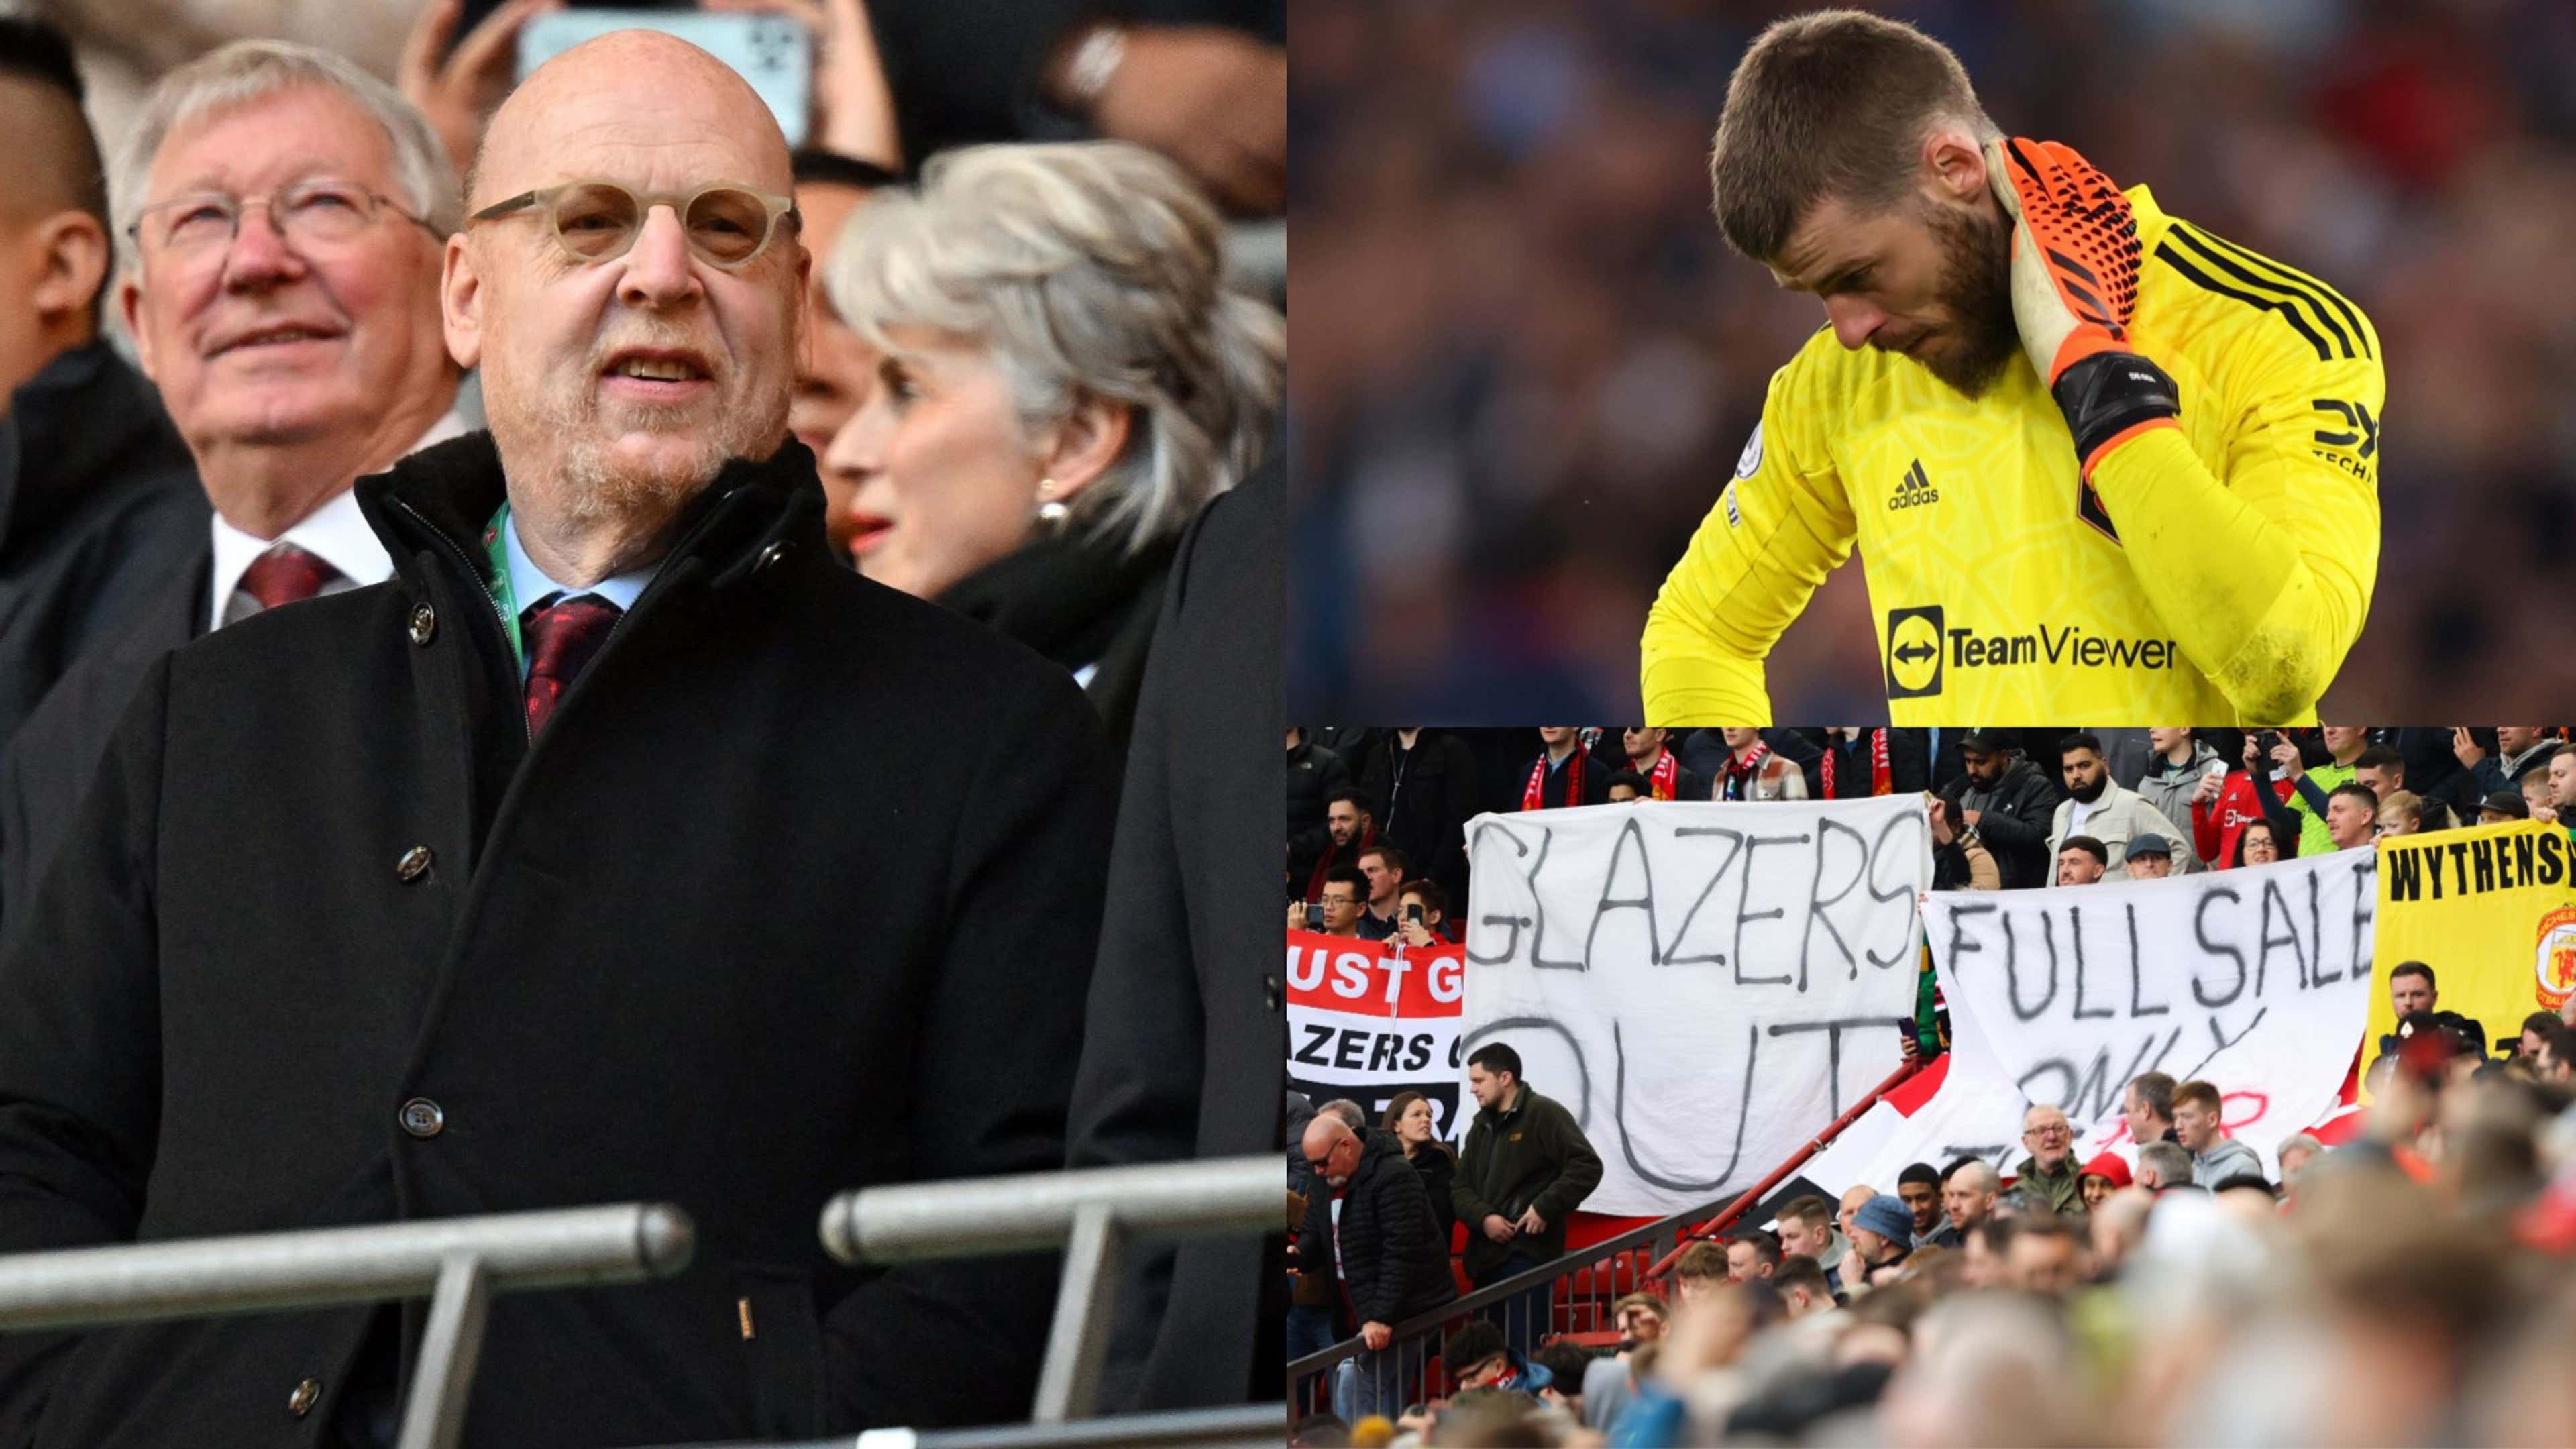 The Glazers must take the blame for exhausted Man Utd's miserable